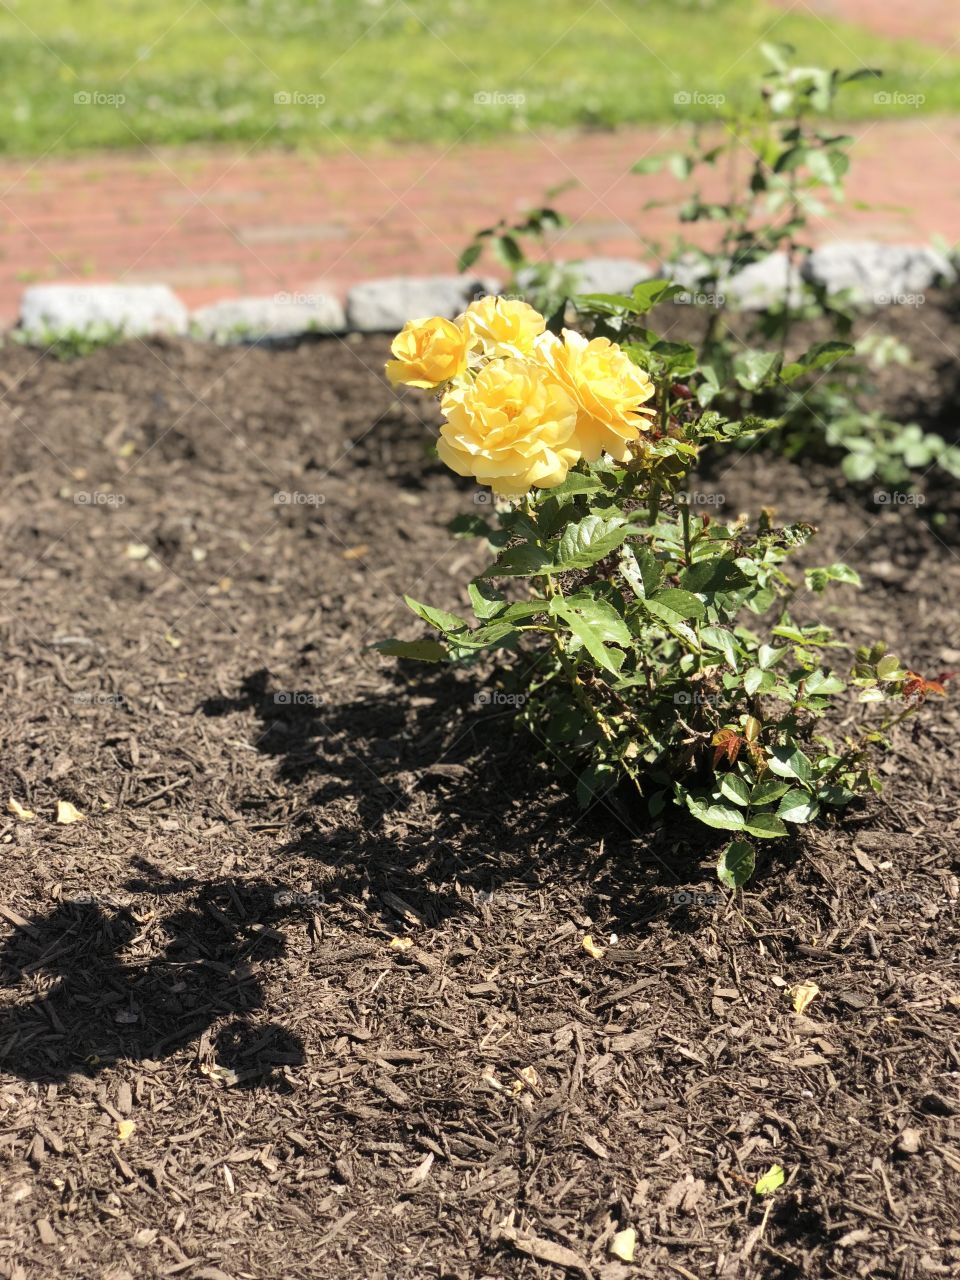 A new rose, ready to leave its beautiful mark on this planet. Taken in Providence, RI. 